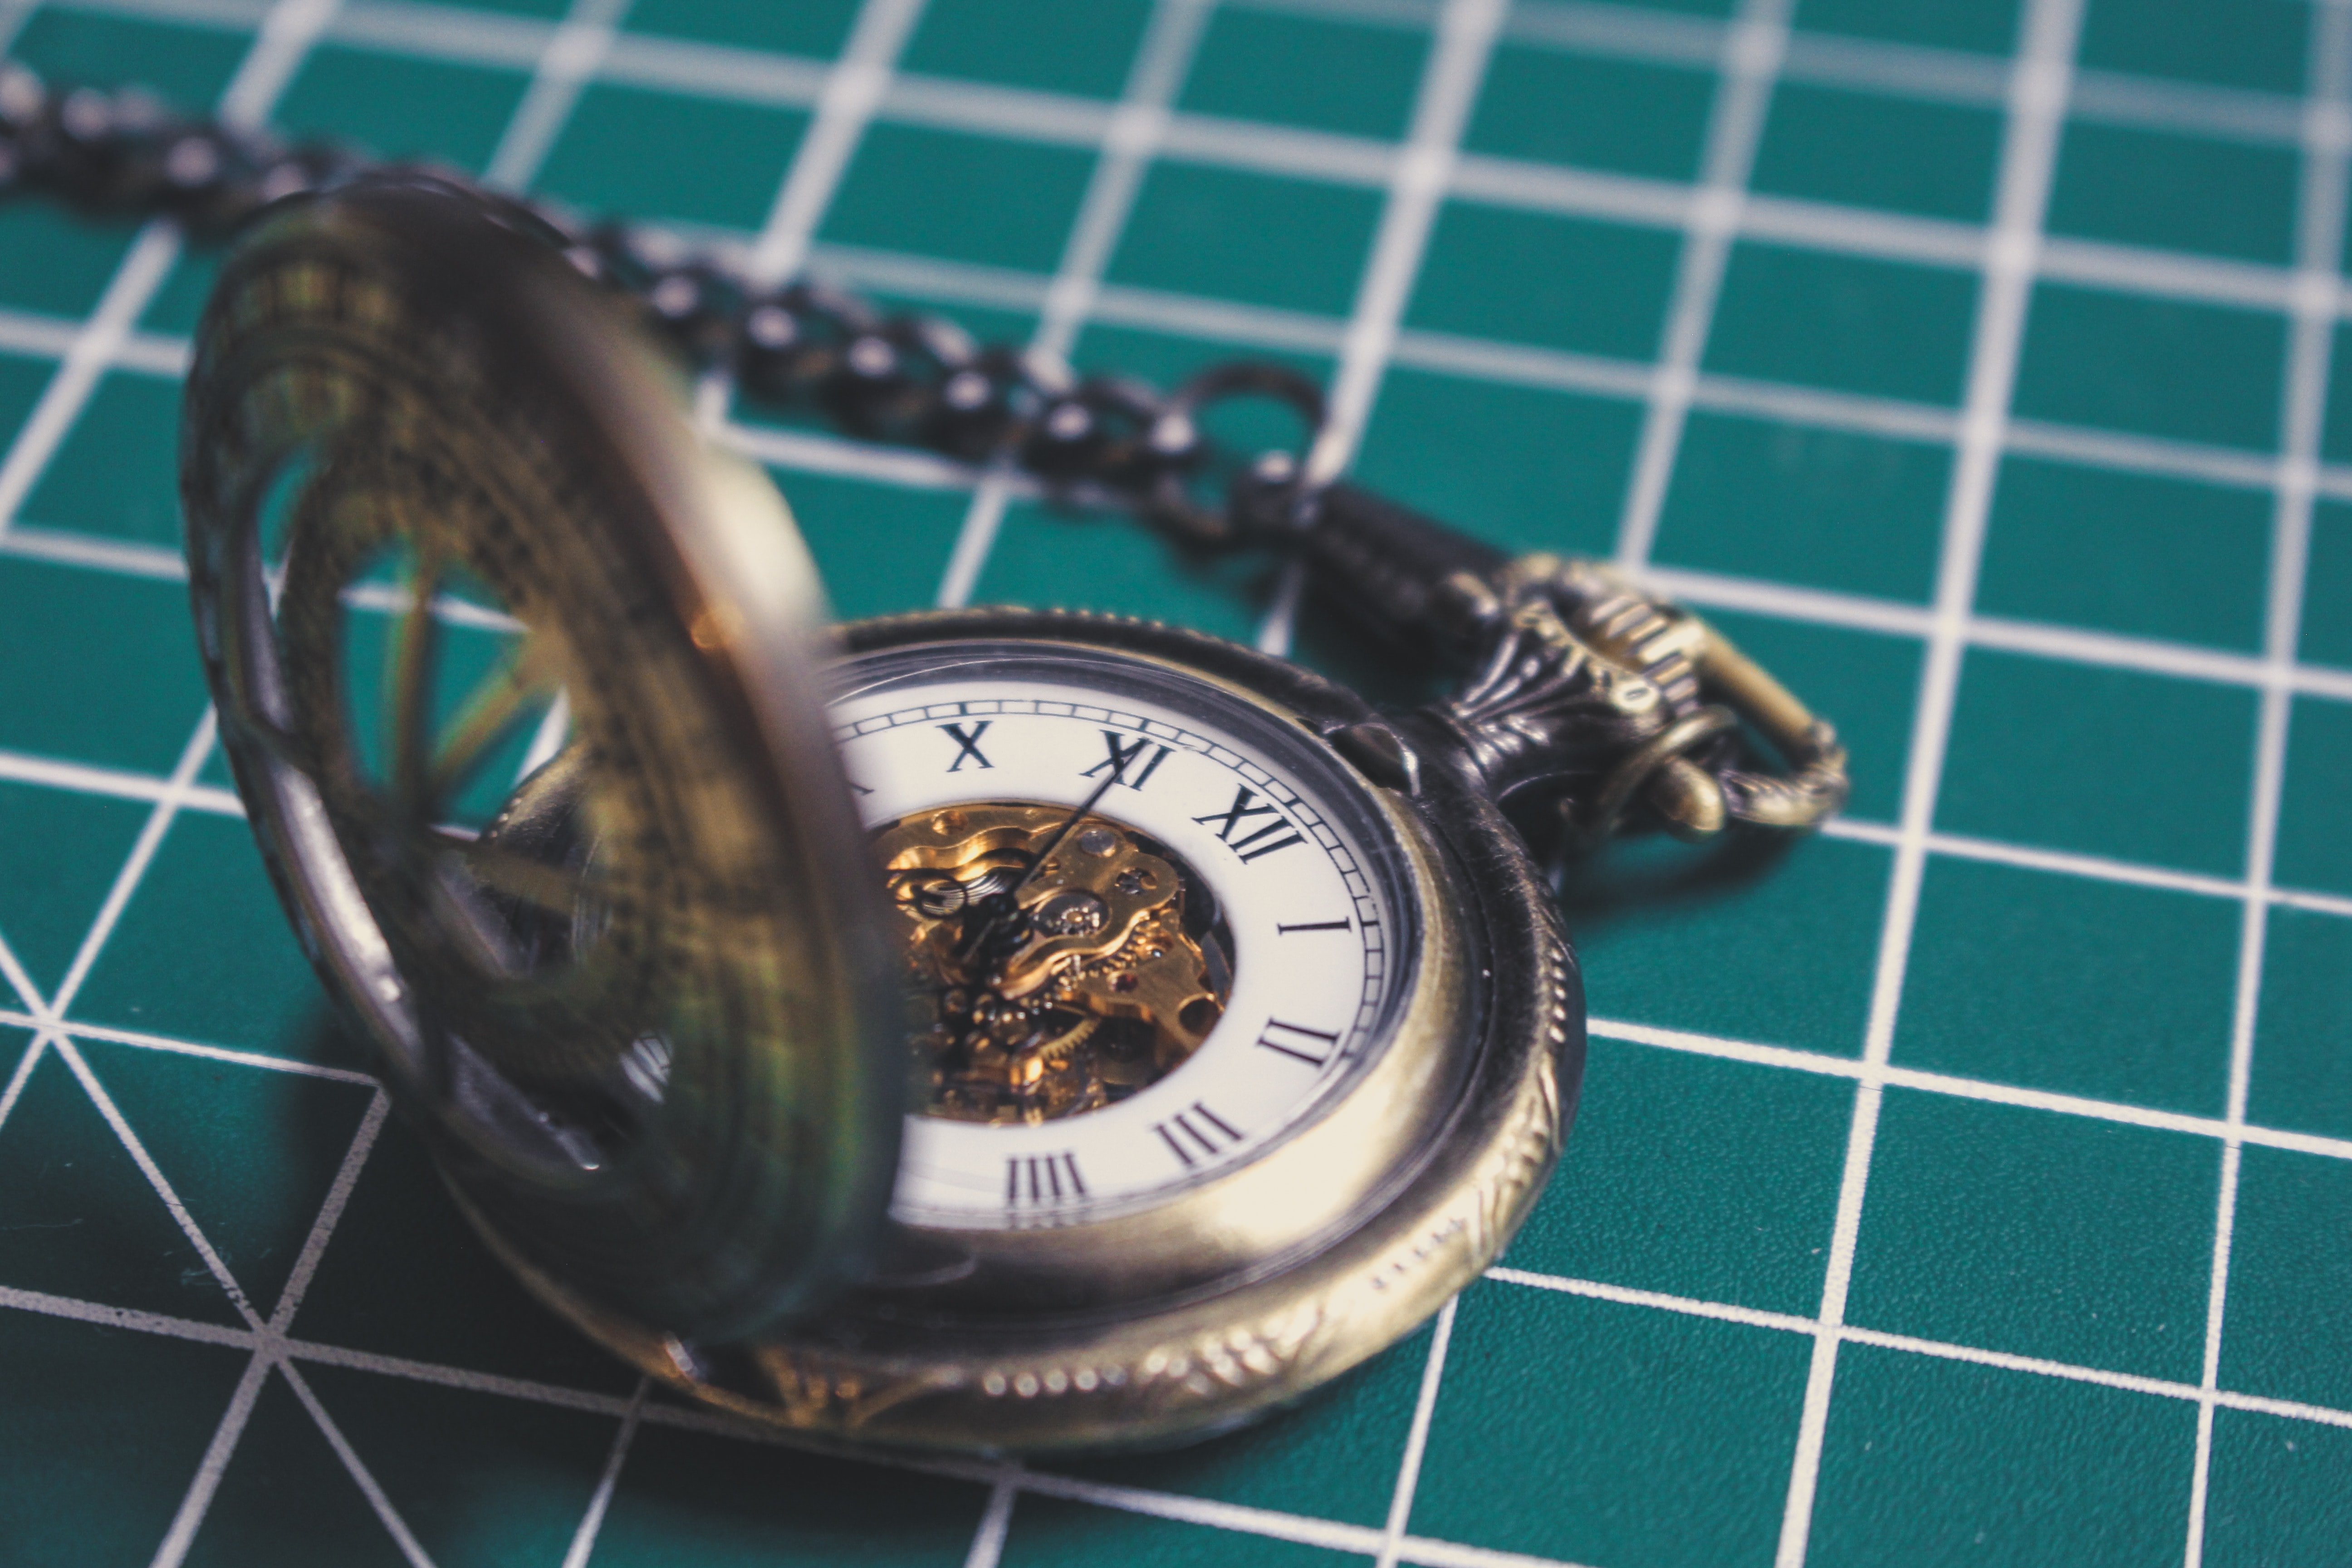 Alina retrieved the vintage timepiece from the buyer. | Source: Unsplash